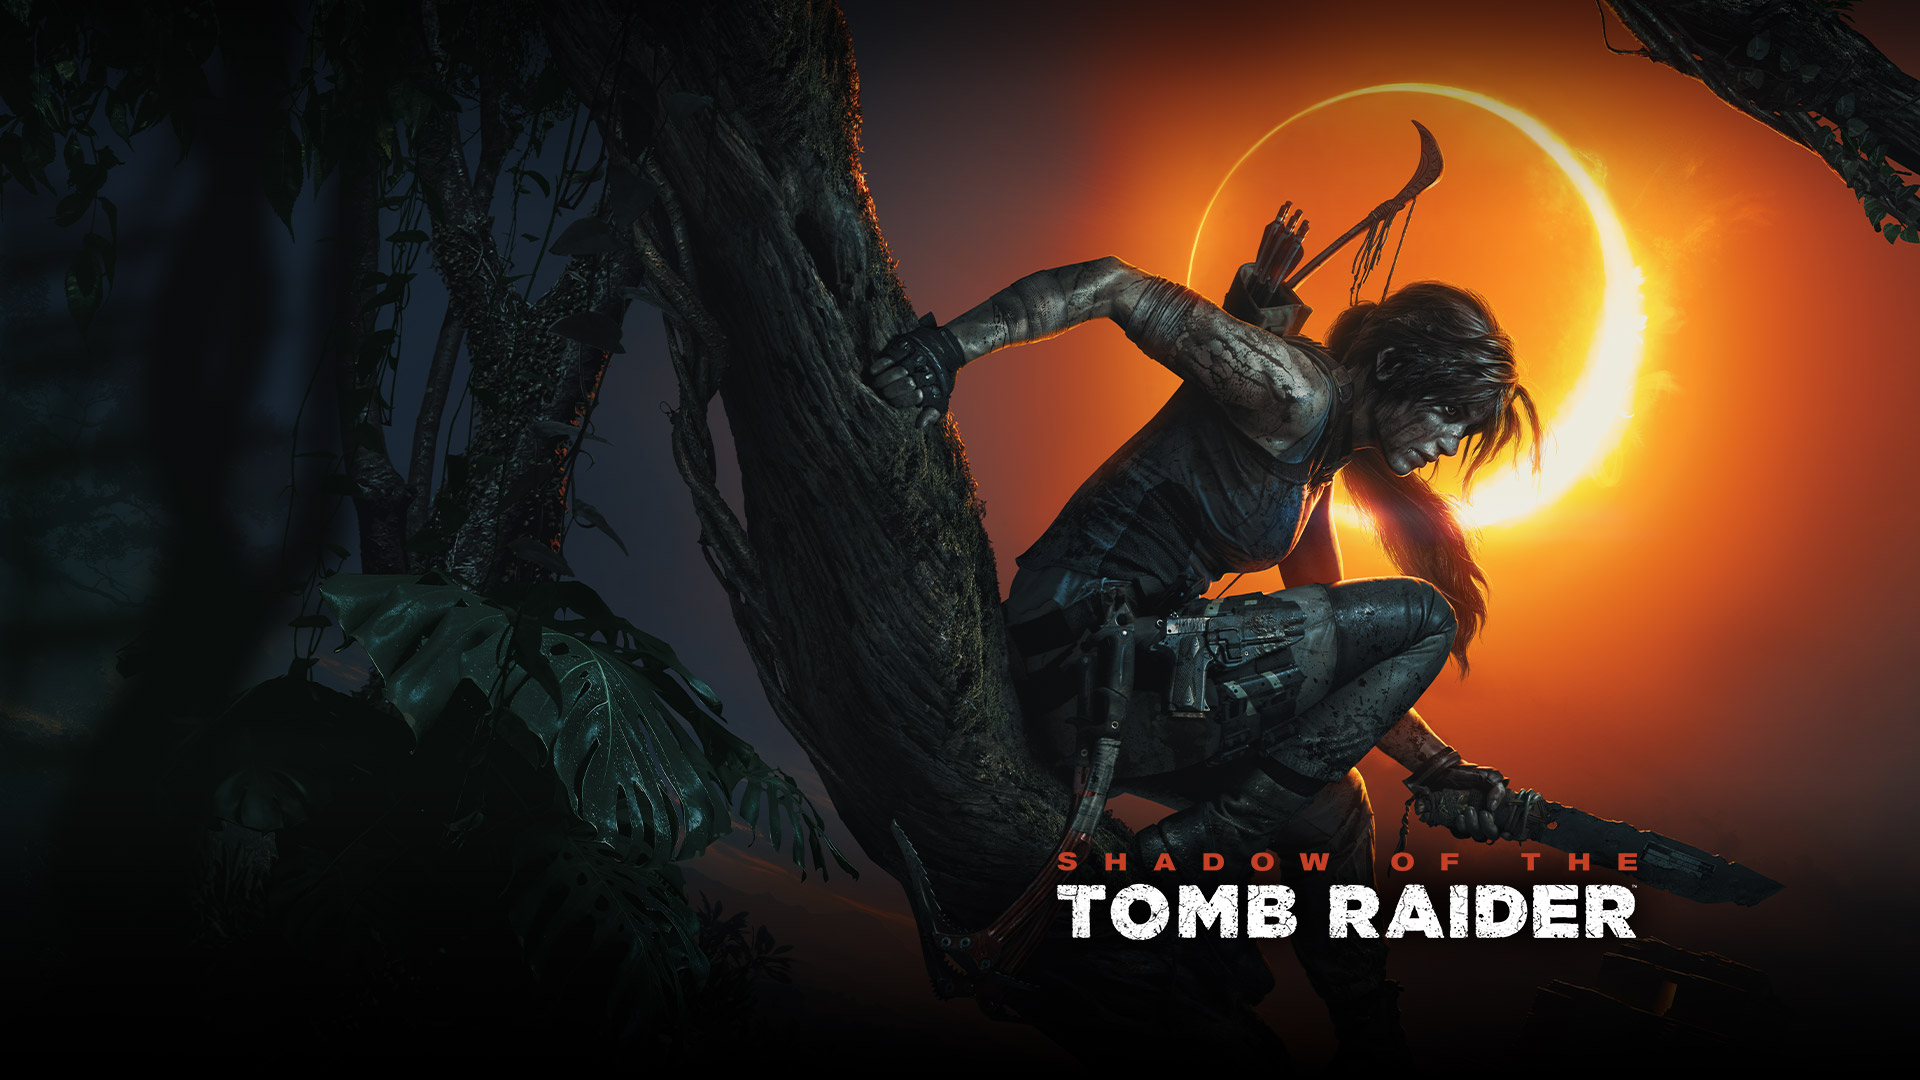 tomb raider rise of the tomb raider free download pc